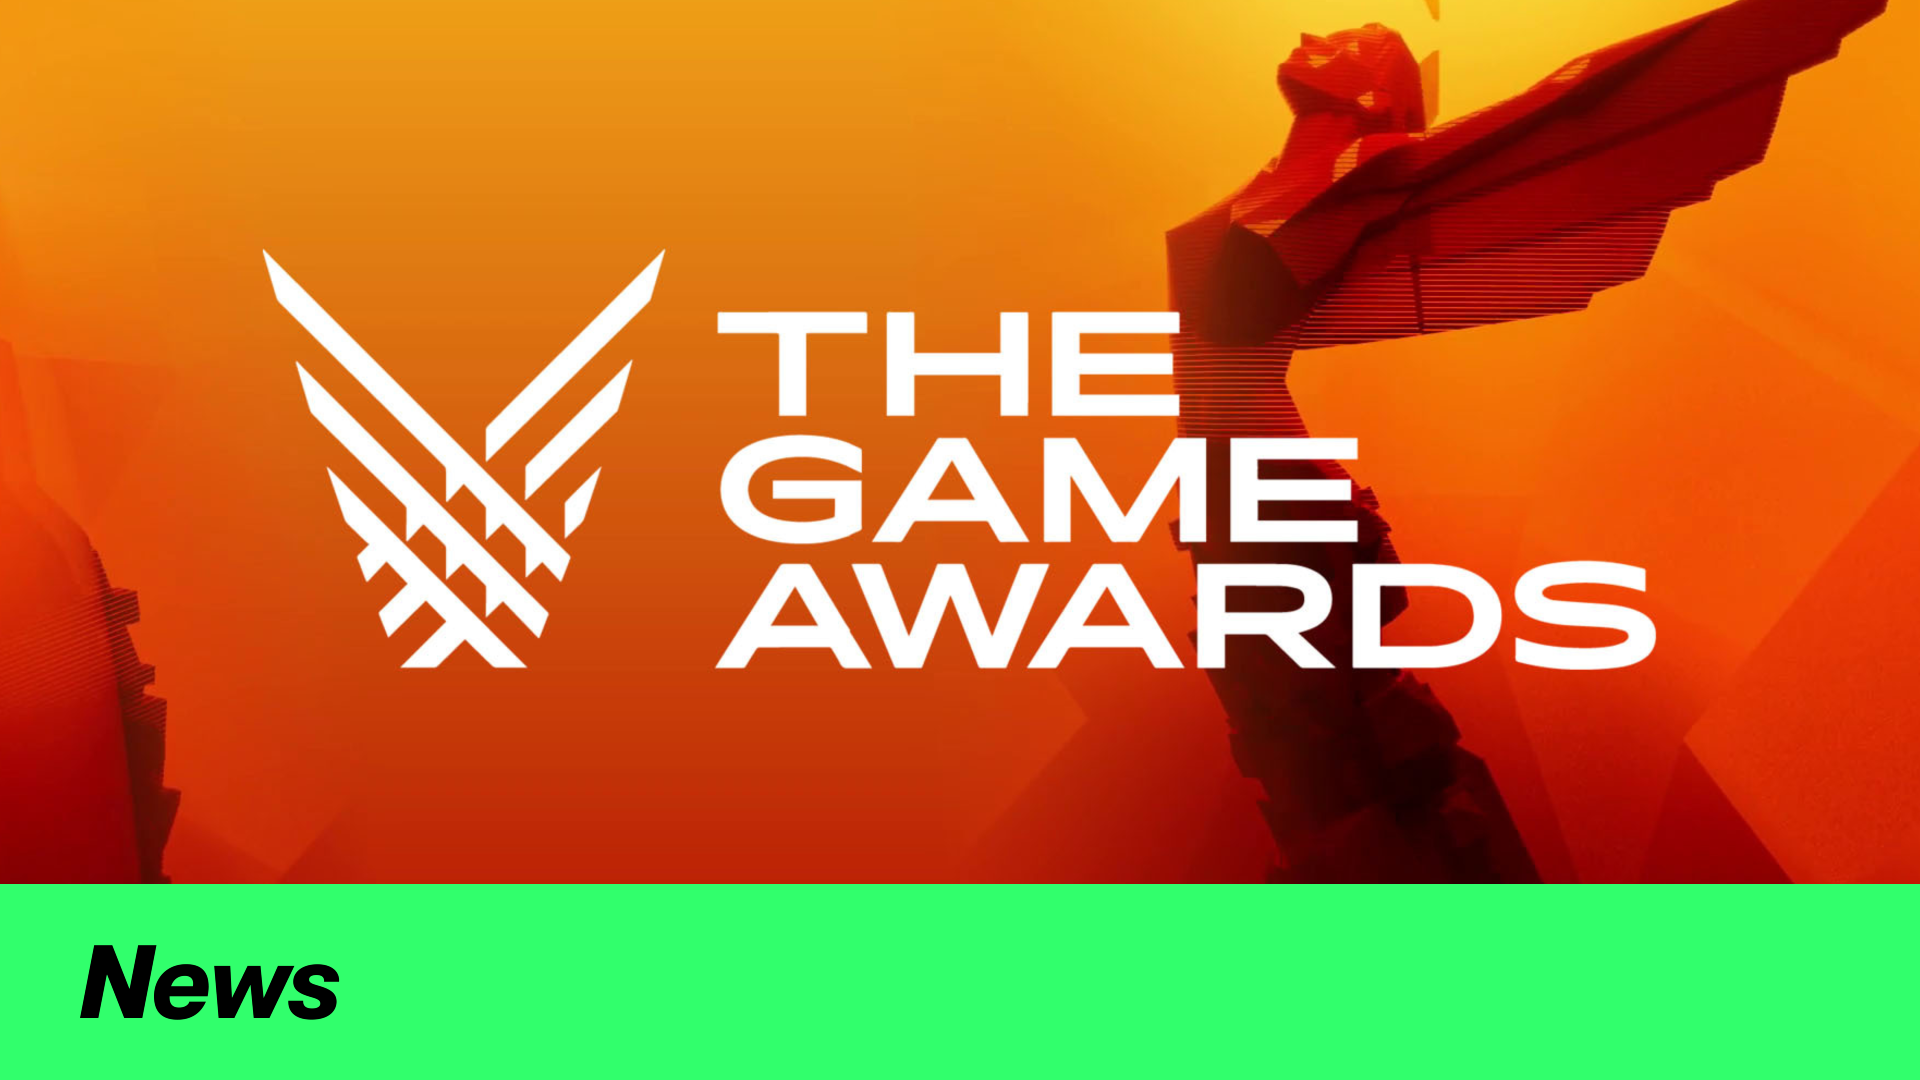 Marvel Snap and Genshin Impact Win Big At The Game Awards - Droid Gamers